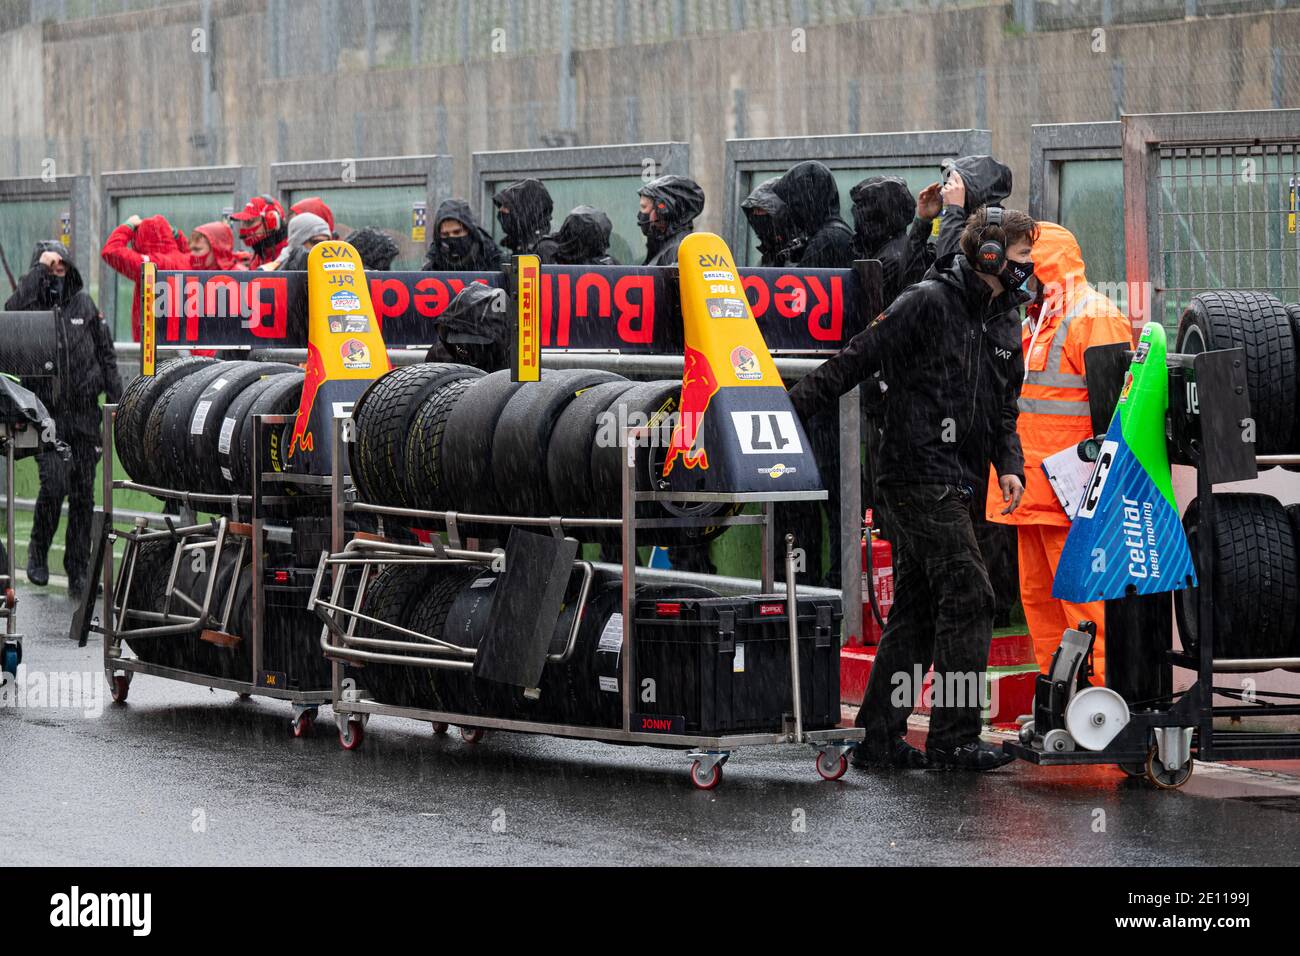 Vallelunga, Italy 6 december 2020, Aci racing weekend. Red Bull racing motorsport car team people with tire set and car nose change parts mechanics un Stock Photo